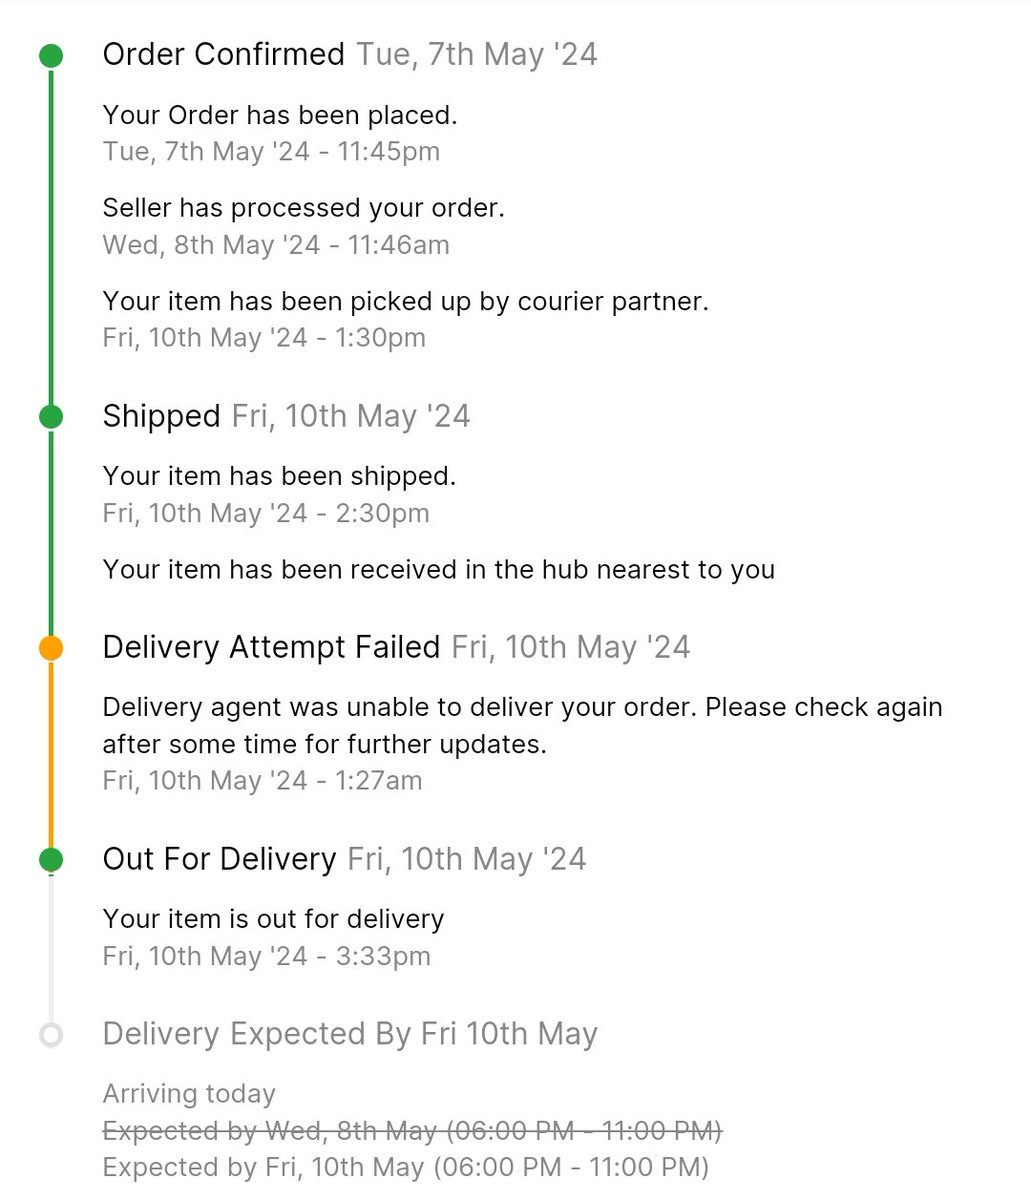 Worst service from @Flipkart - OD431196100805032200
Order was placed on 7th May with scheduled delivery on 8th but it was not delivered on 9th also and today on 10th also @flipkartsupport team is not providing a solution for the same.
@ekartlogistics is worst delivery partner.